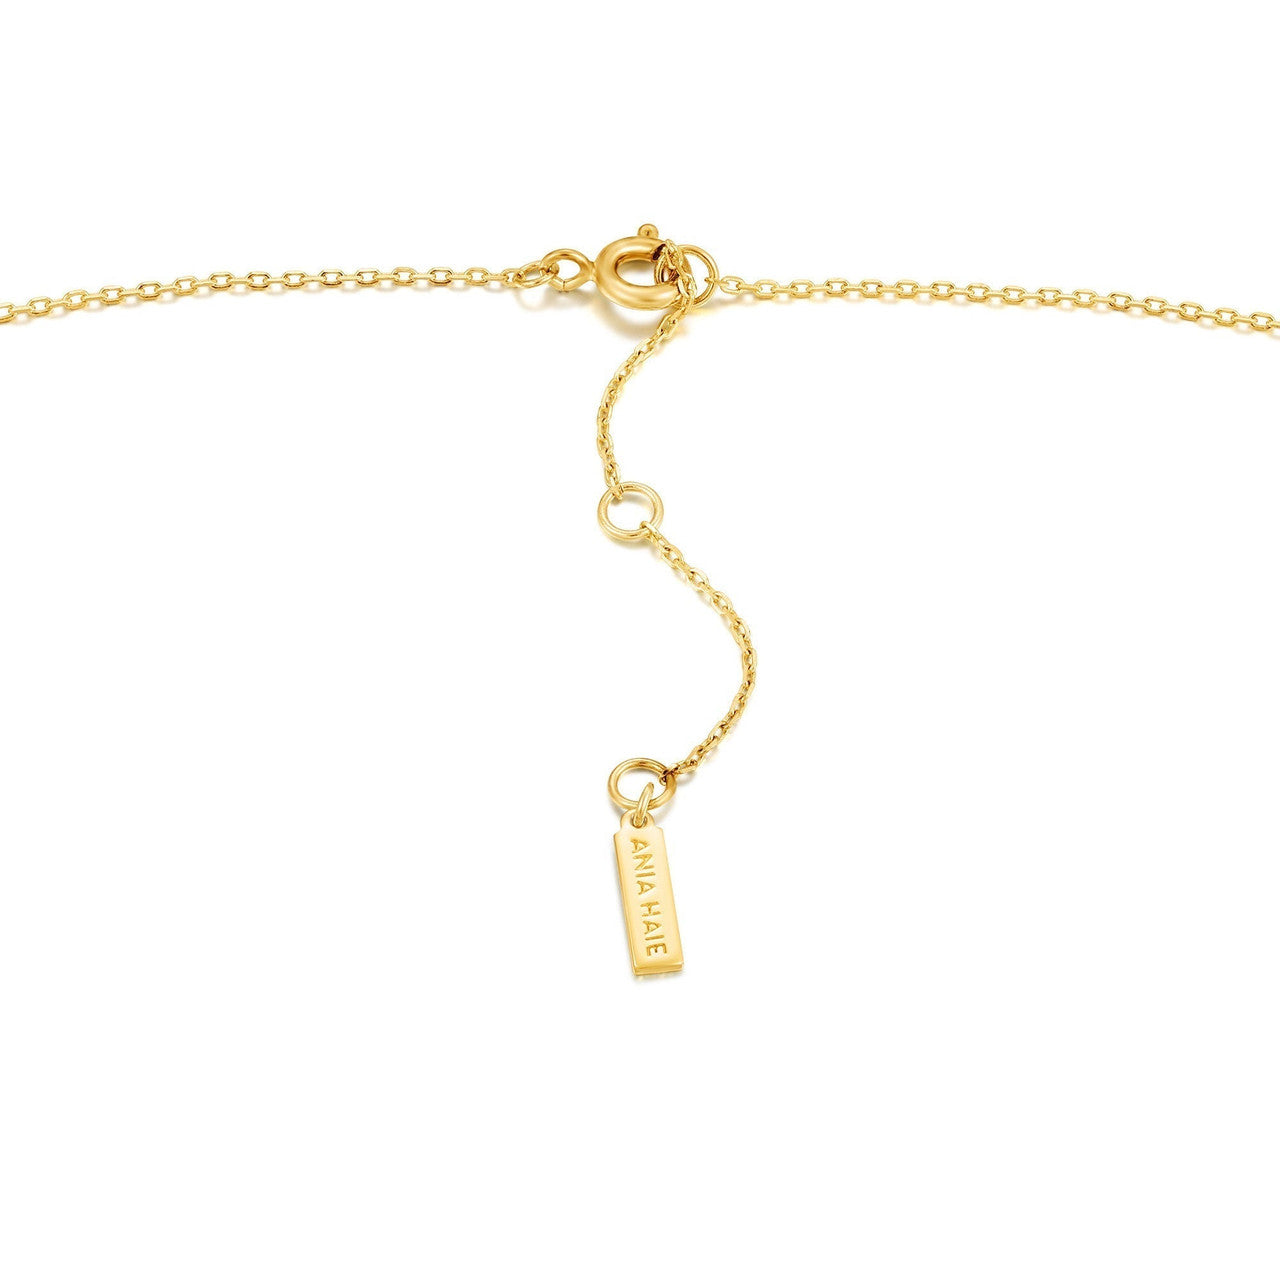 Ania Haie Gold Necklaces